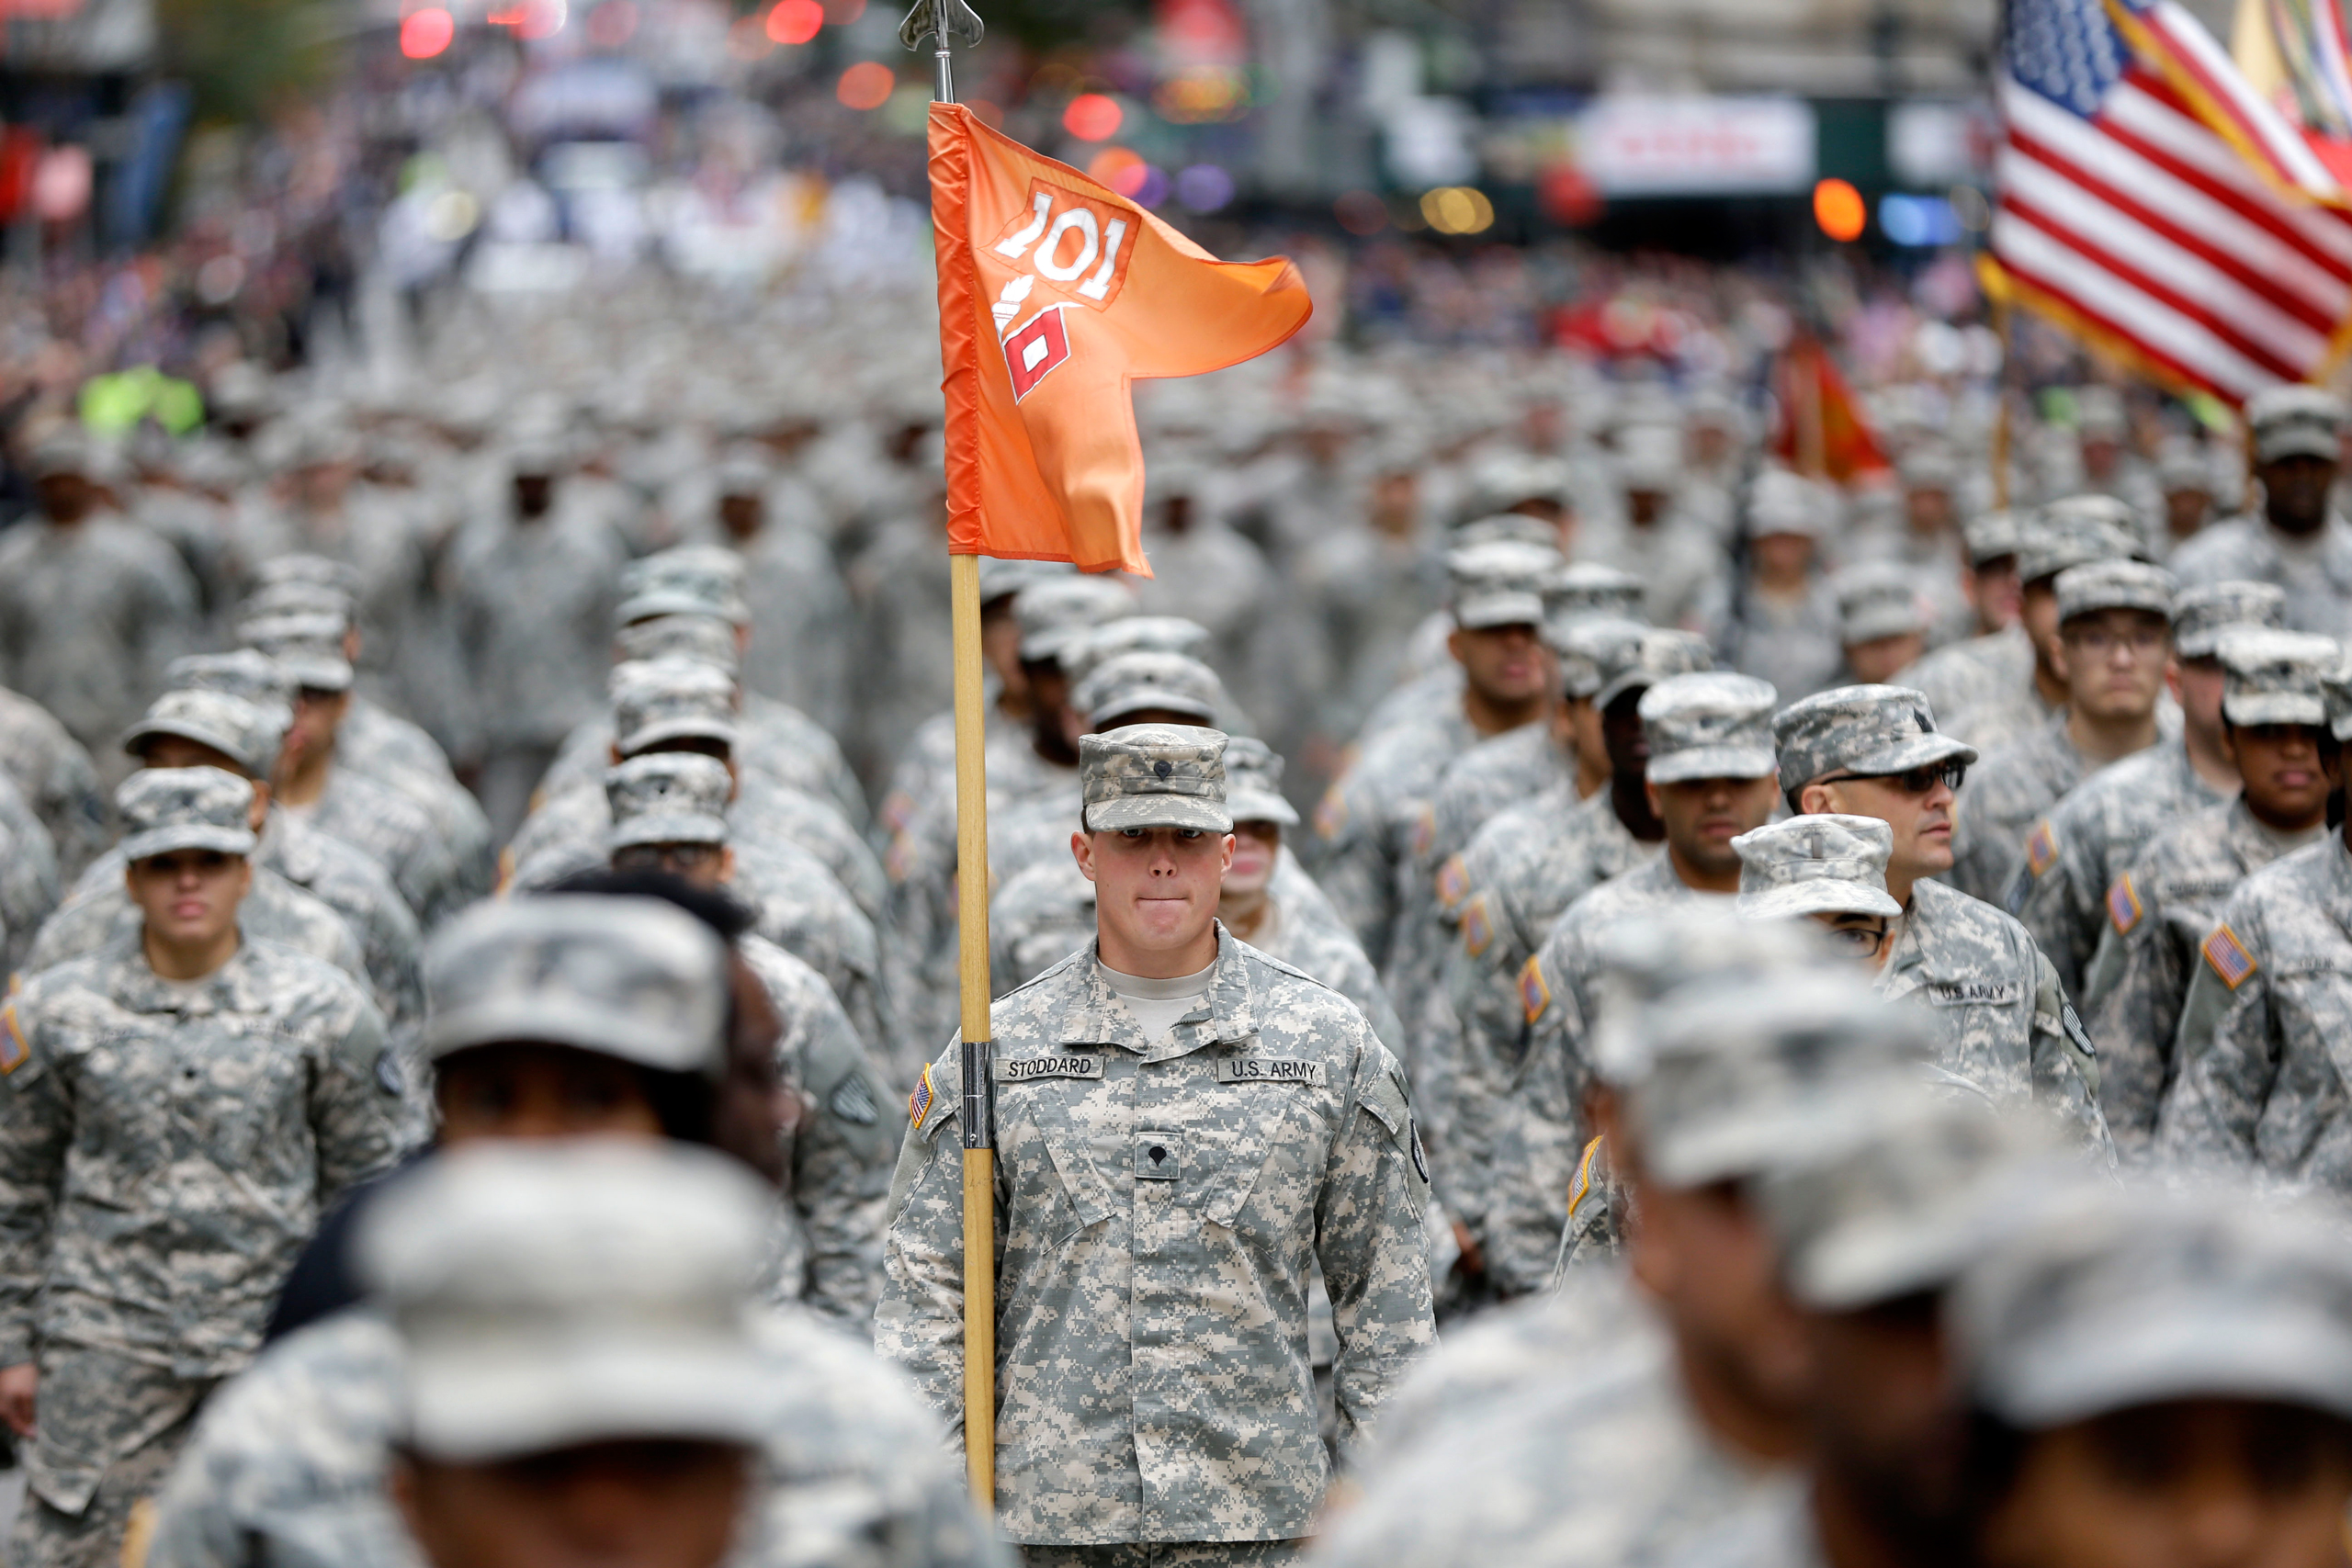 Military personnel march in the annual Veteran's Day parade in New York on Nov. 11, 2015. (Seth Wenig—AP)